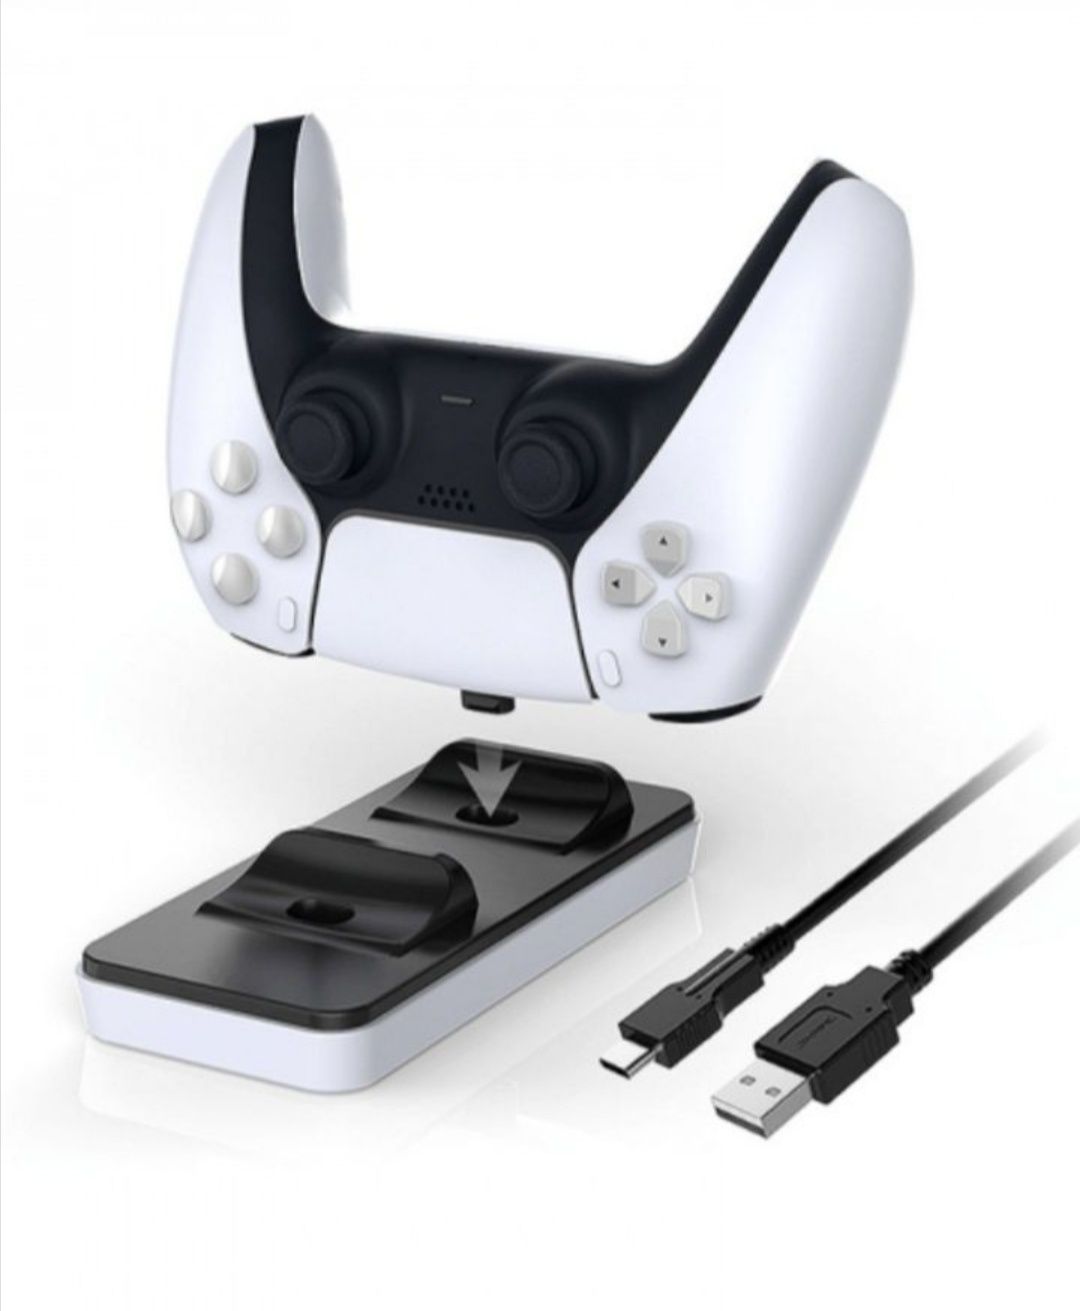 Playstation 5 - dual dock controller charger